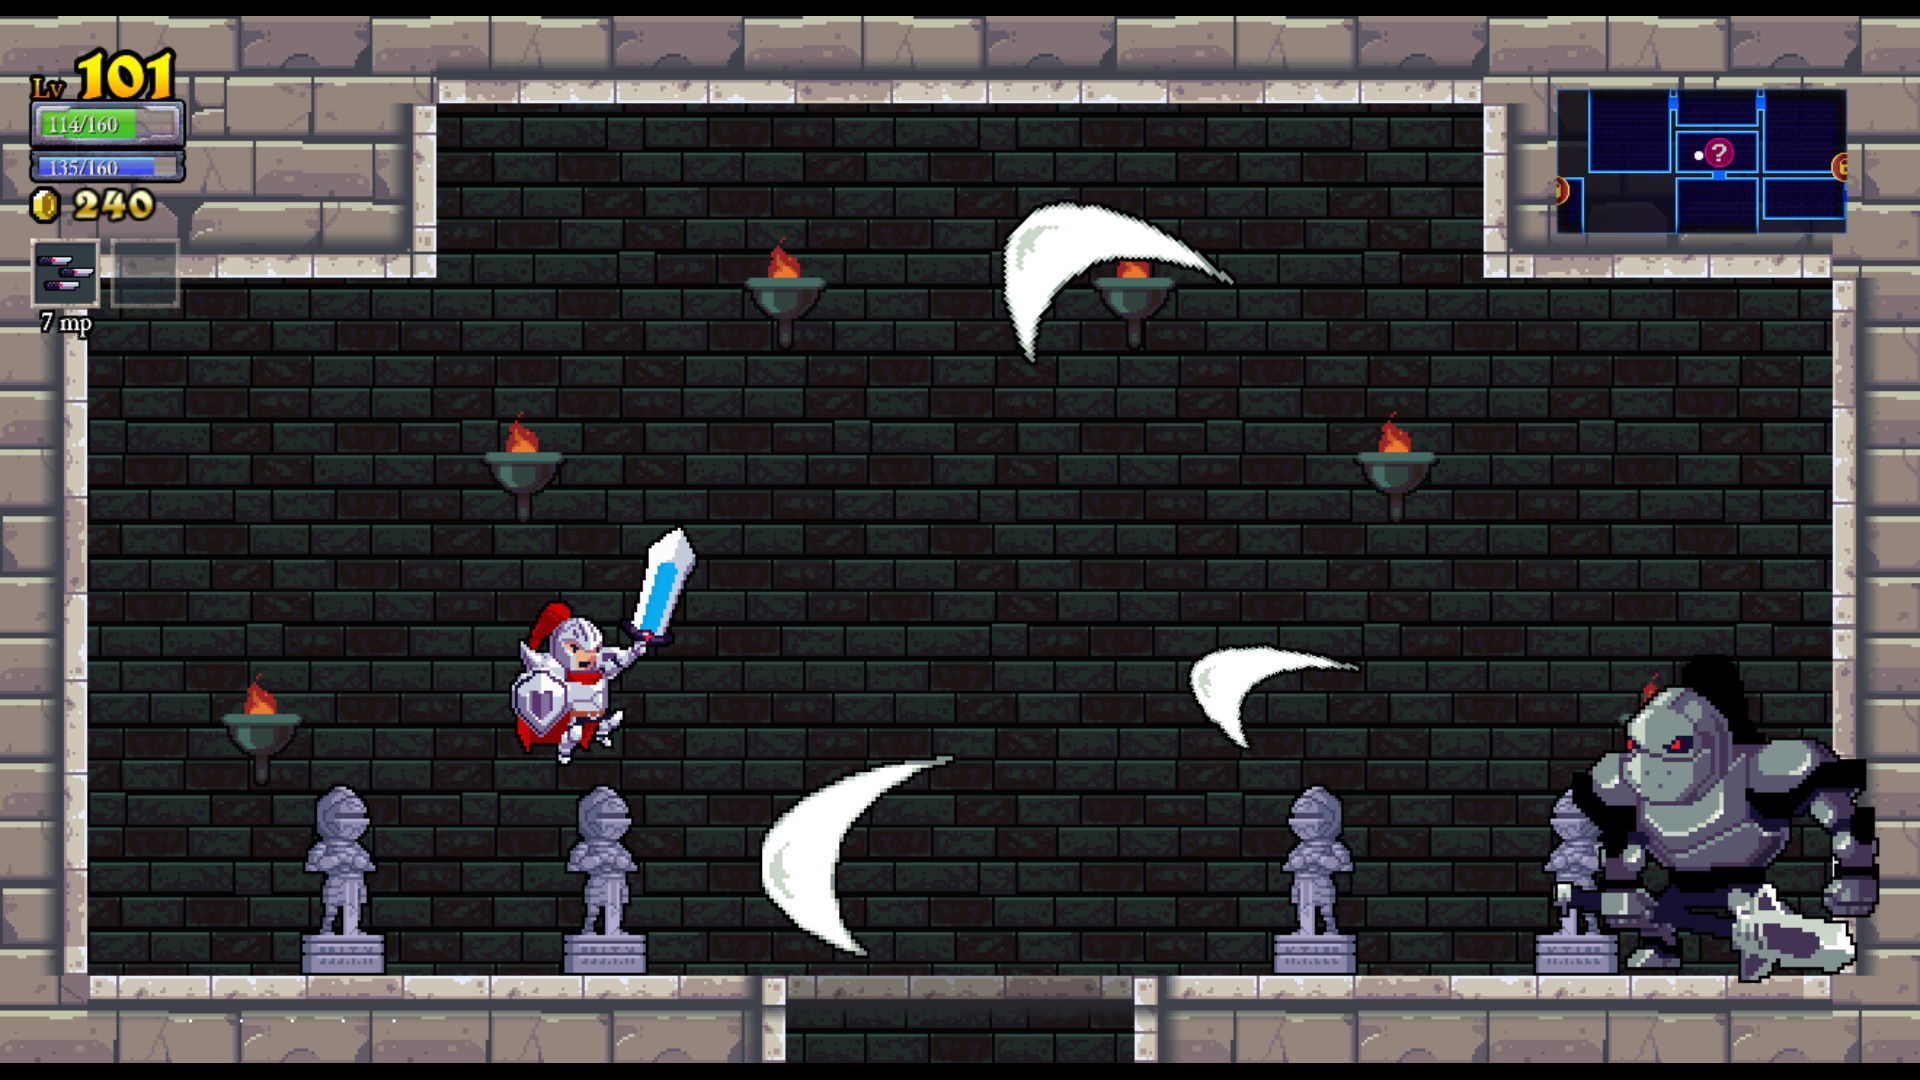 RogueLegacy 2013-06-19 00-49-56-237.png